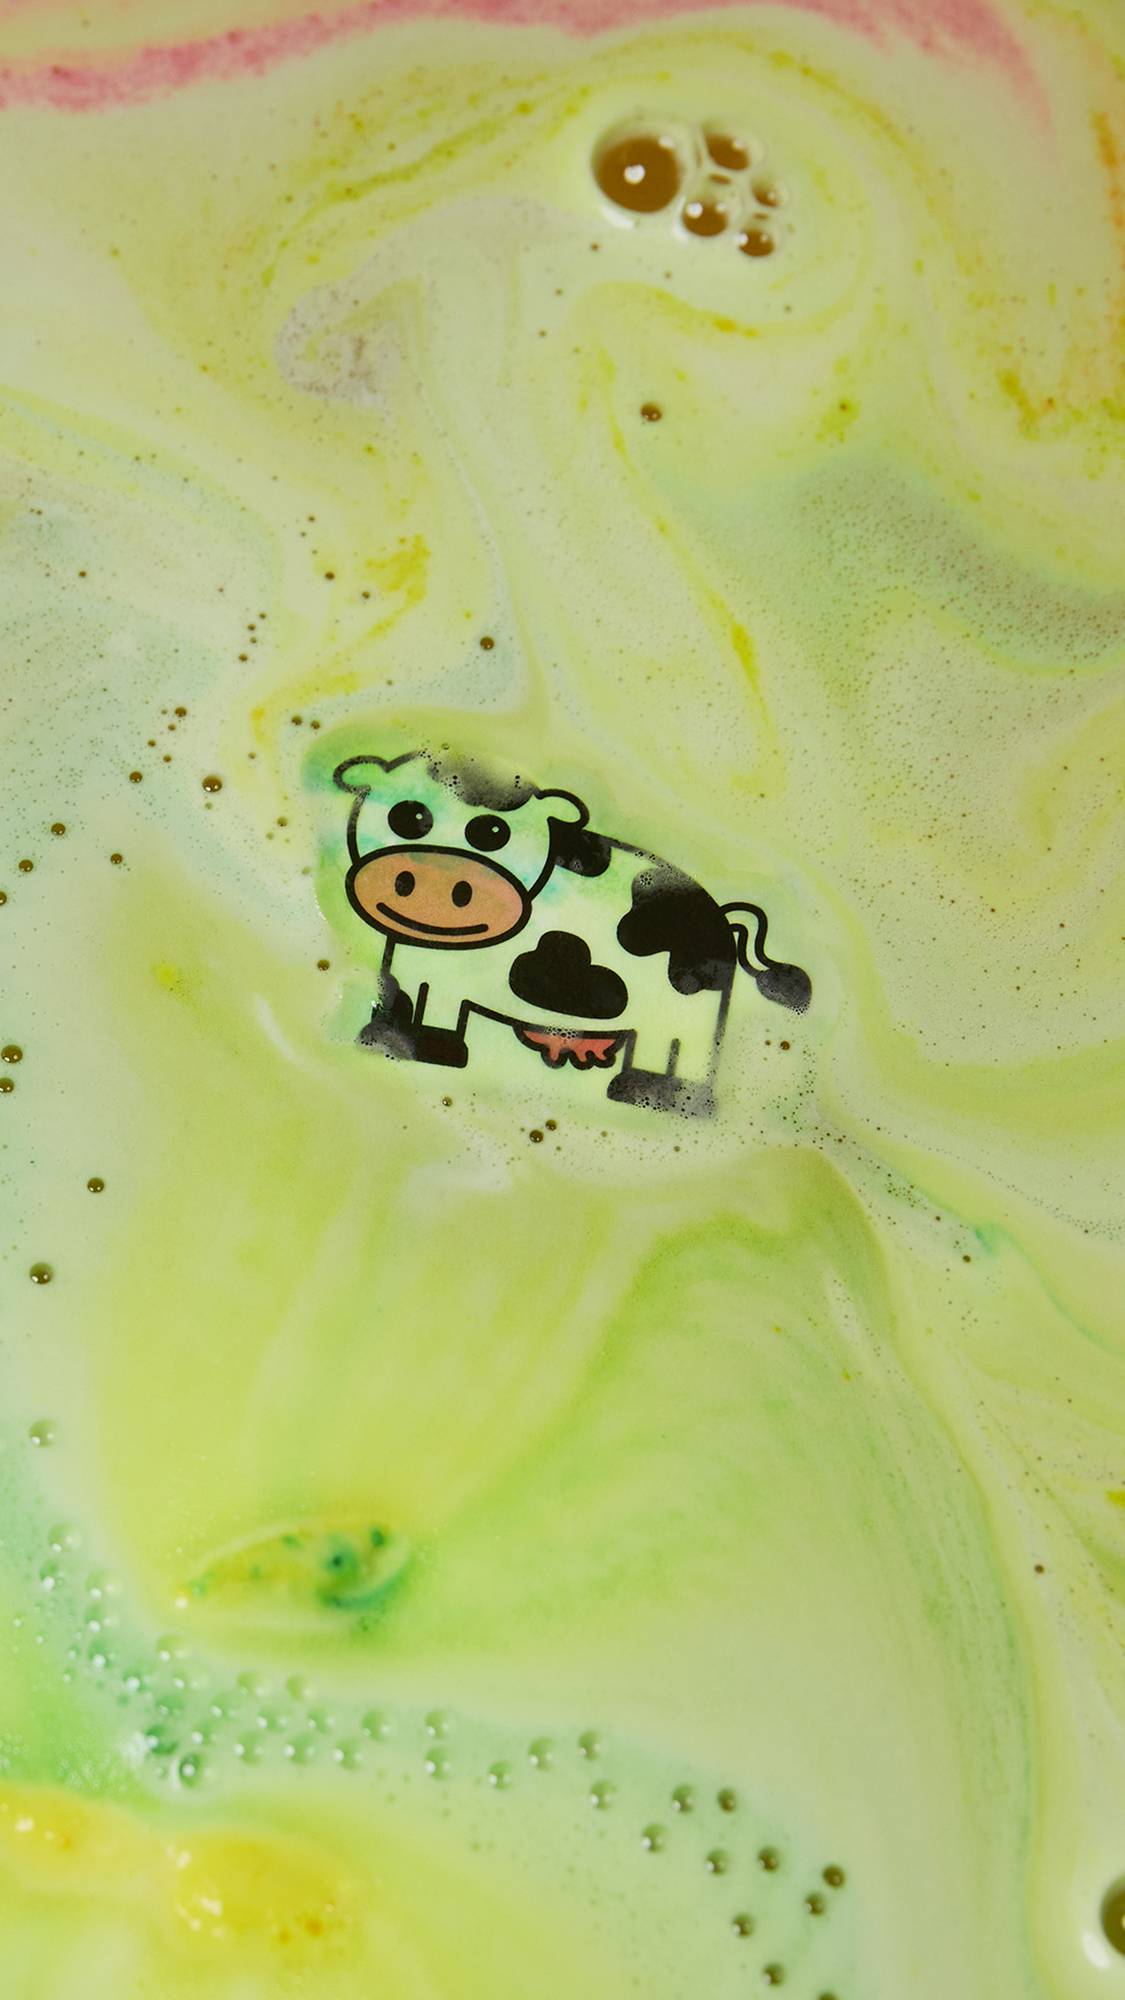 The bath bomb has fully dissolved revealing a fun, friendly, rice paper cow hidden inside. 